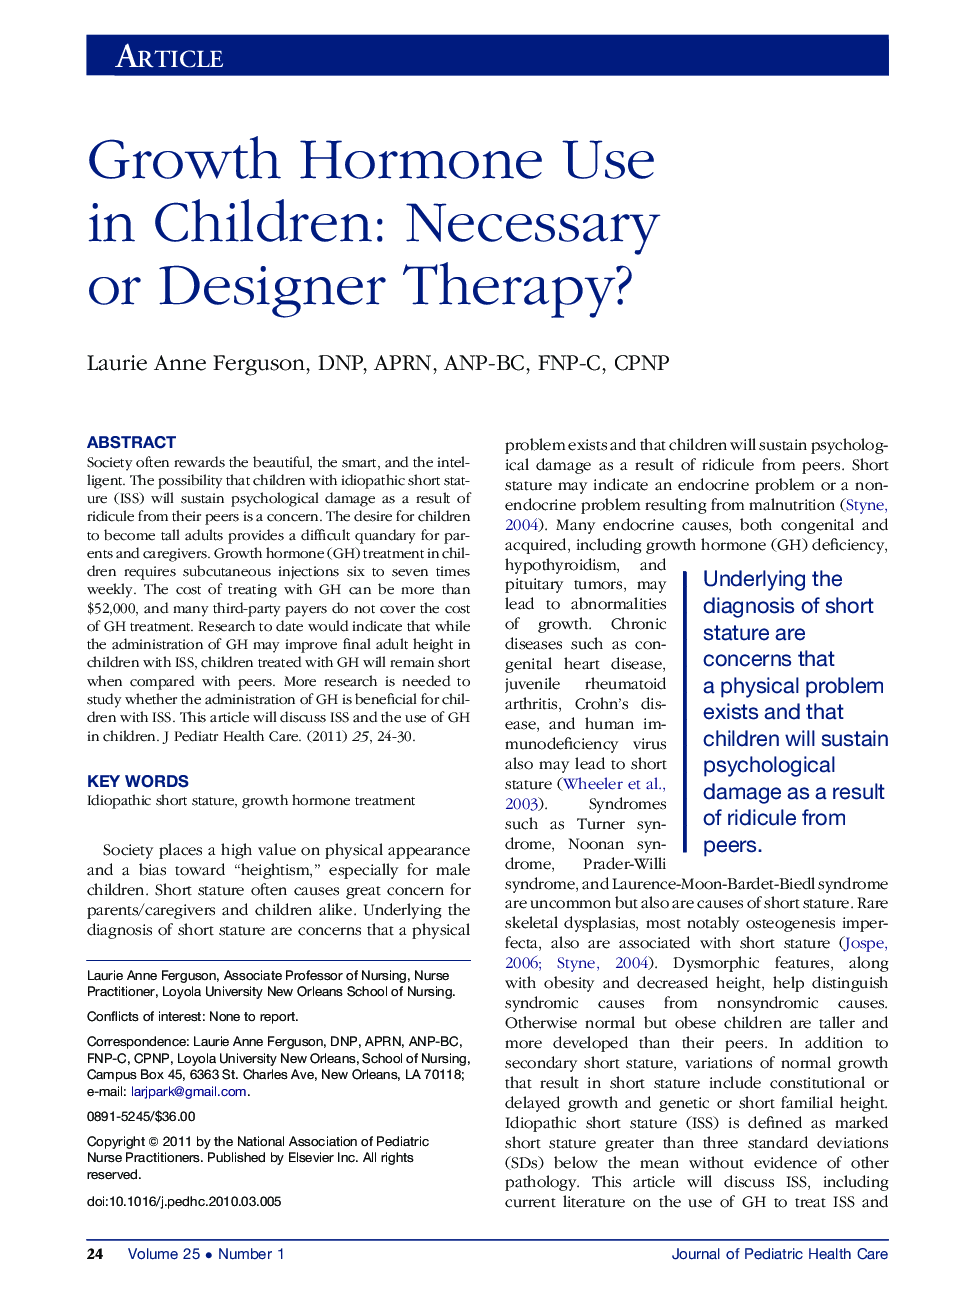 Growth Hormone Use in Children: Necessary or Designer Therapy? 